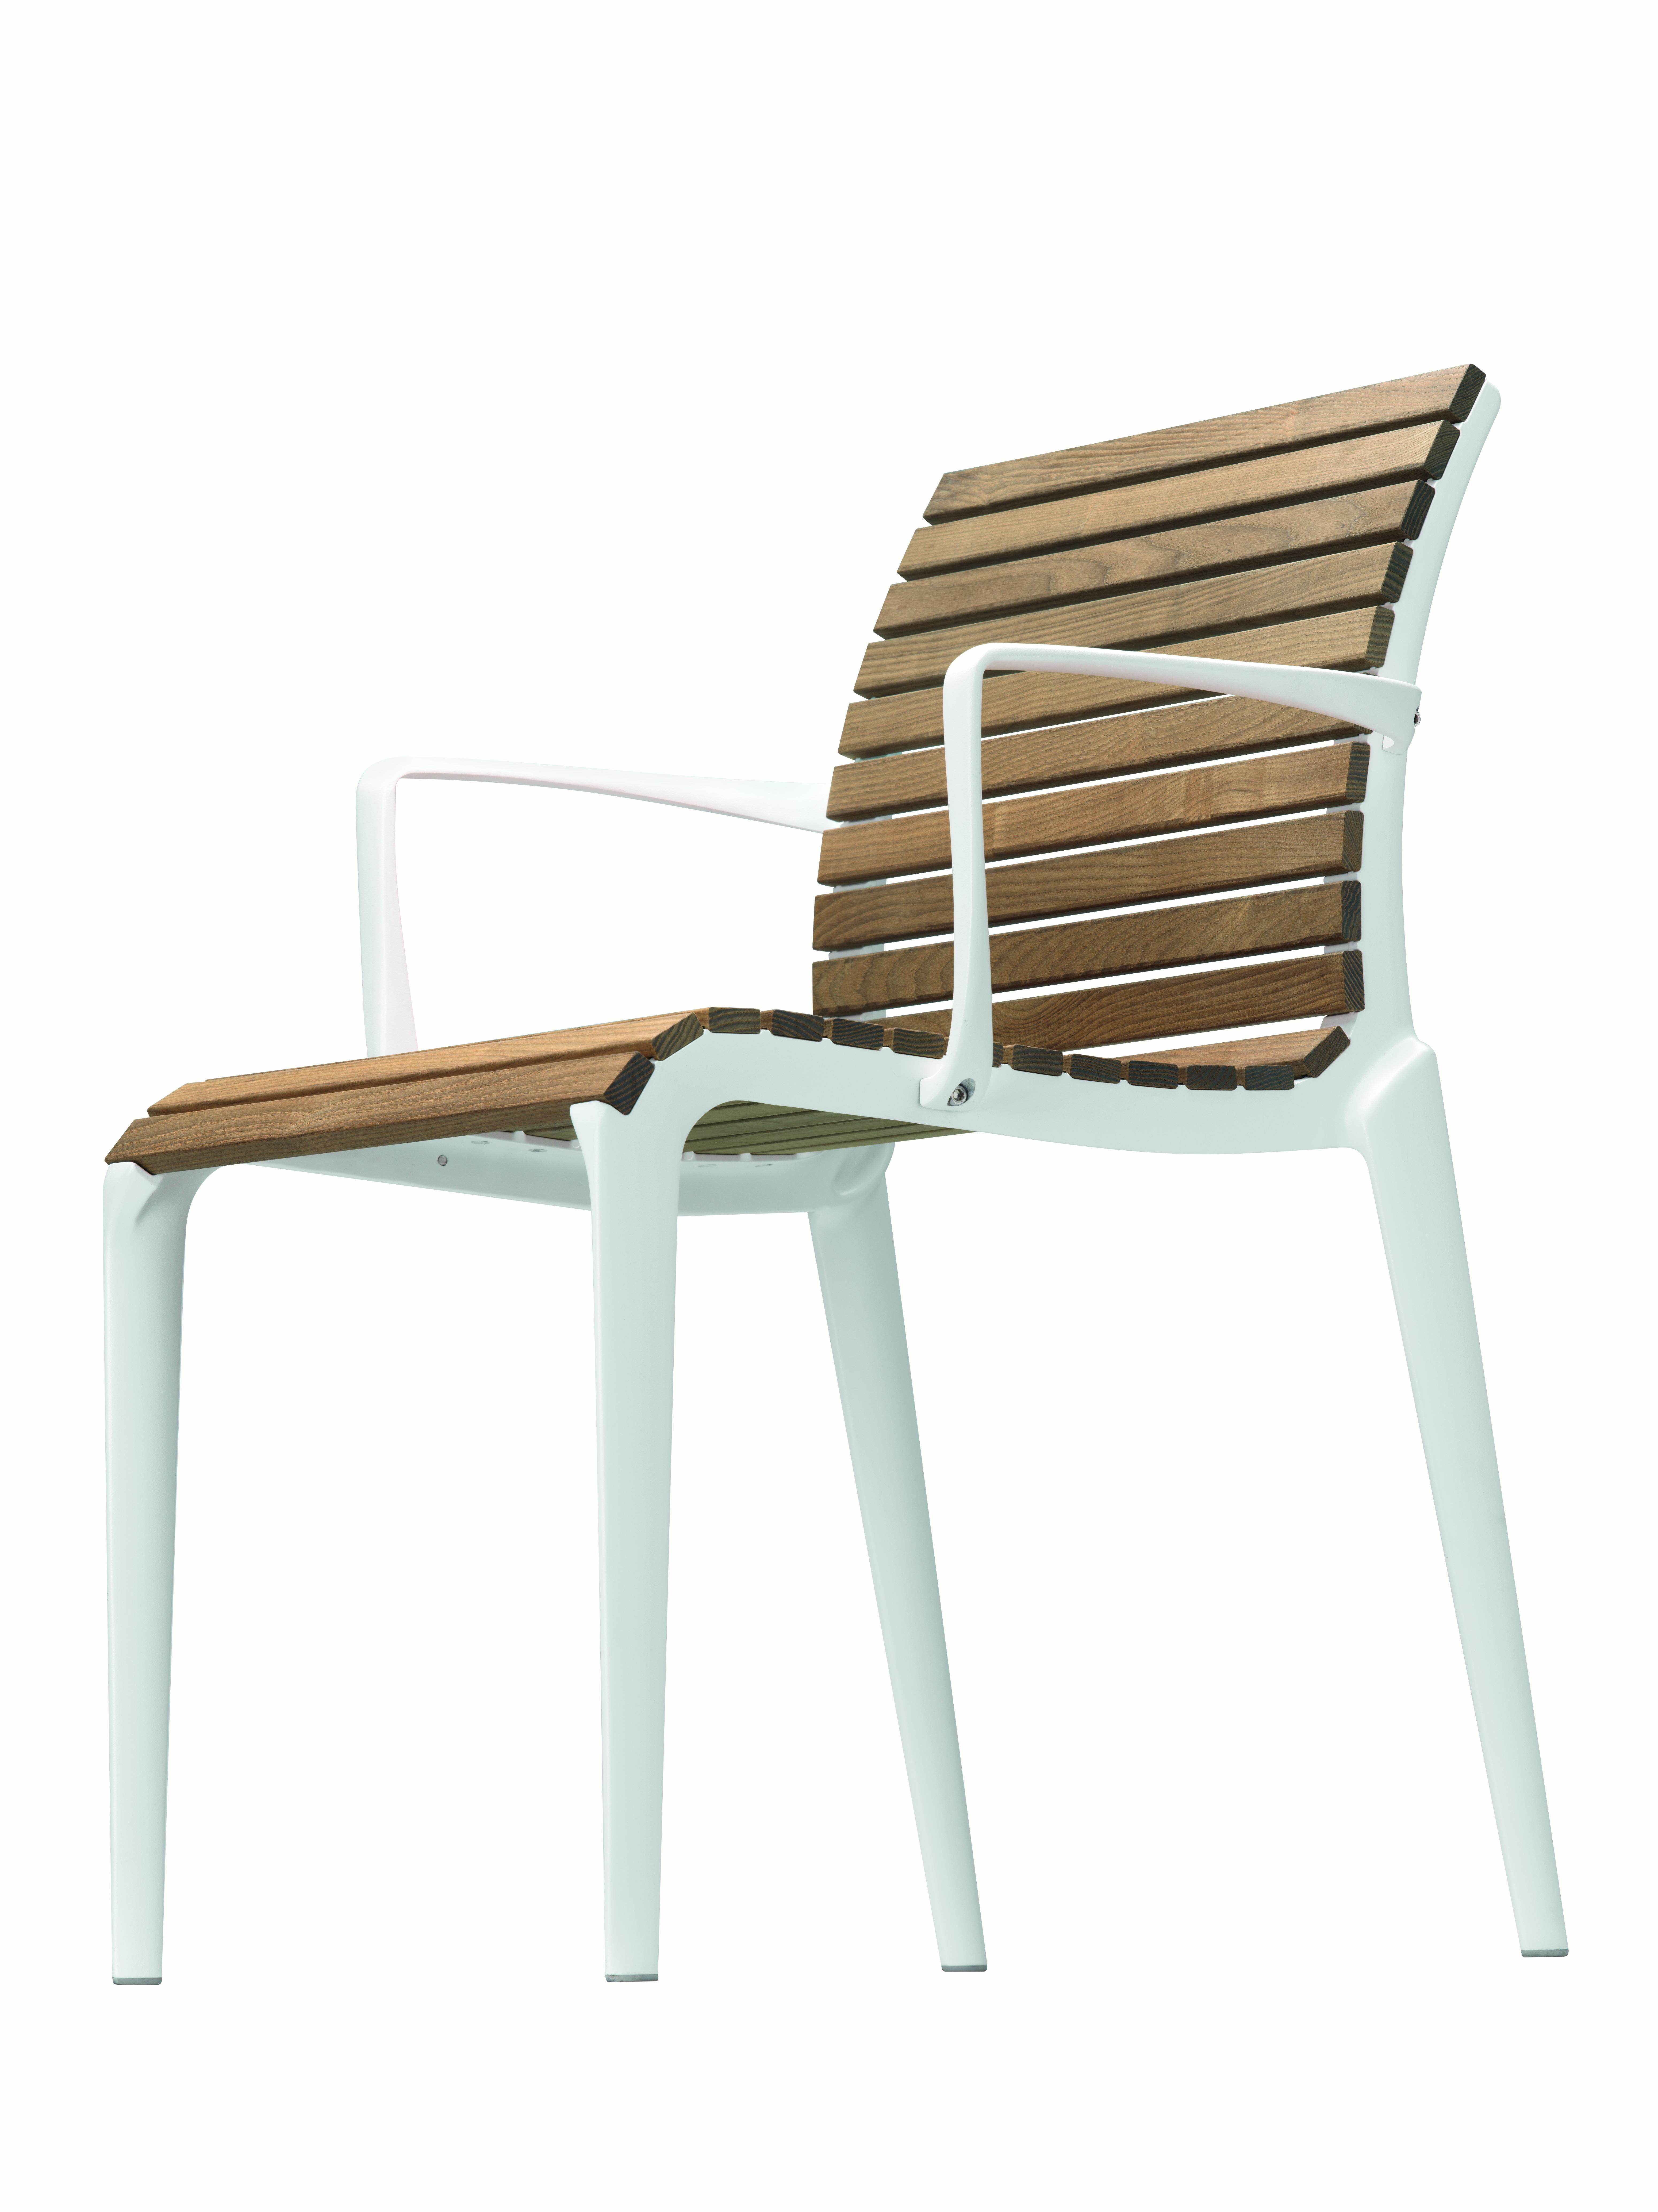 Alias Tech Wood Armchair in Ash and Lacquered Aluminium Frame by Alberto Meda

Chair with arms for outdoor use with structure in lacquered die-cast aluminium; seat and back in heattreated ash wood or raw teak slats. FSC® certified product (version